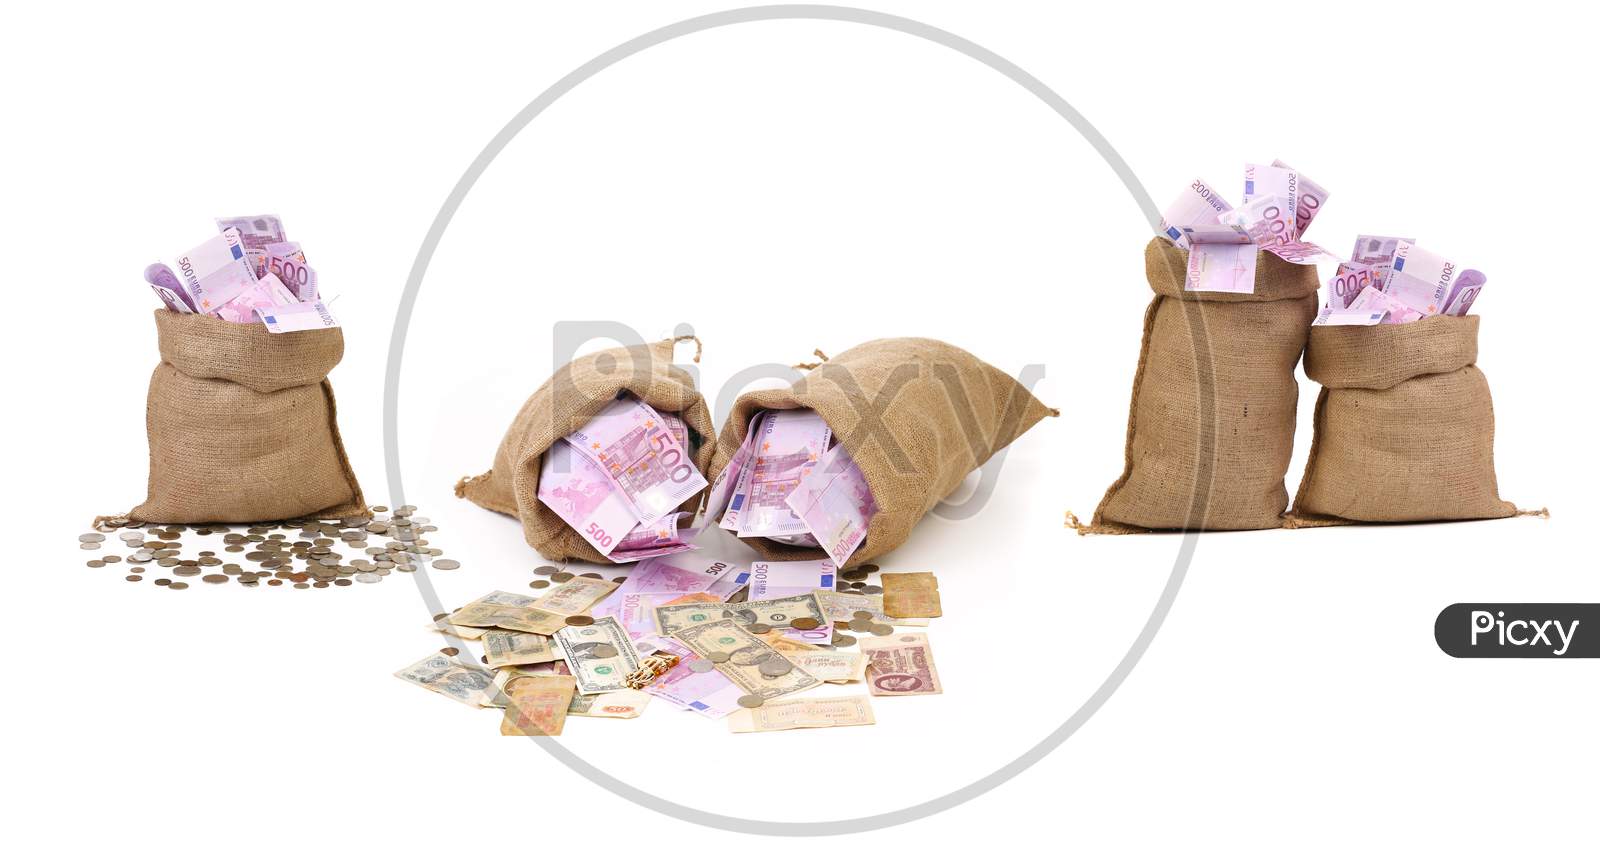 Collage Of Money In Bags. Isolated On A White Background.